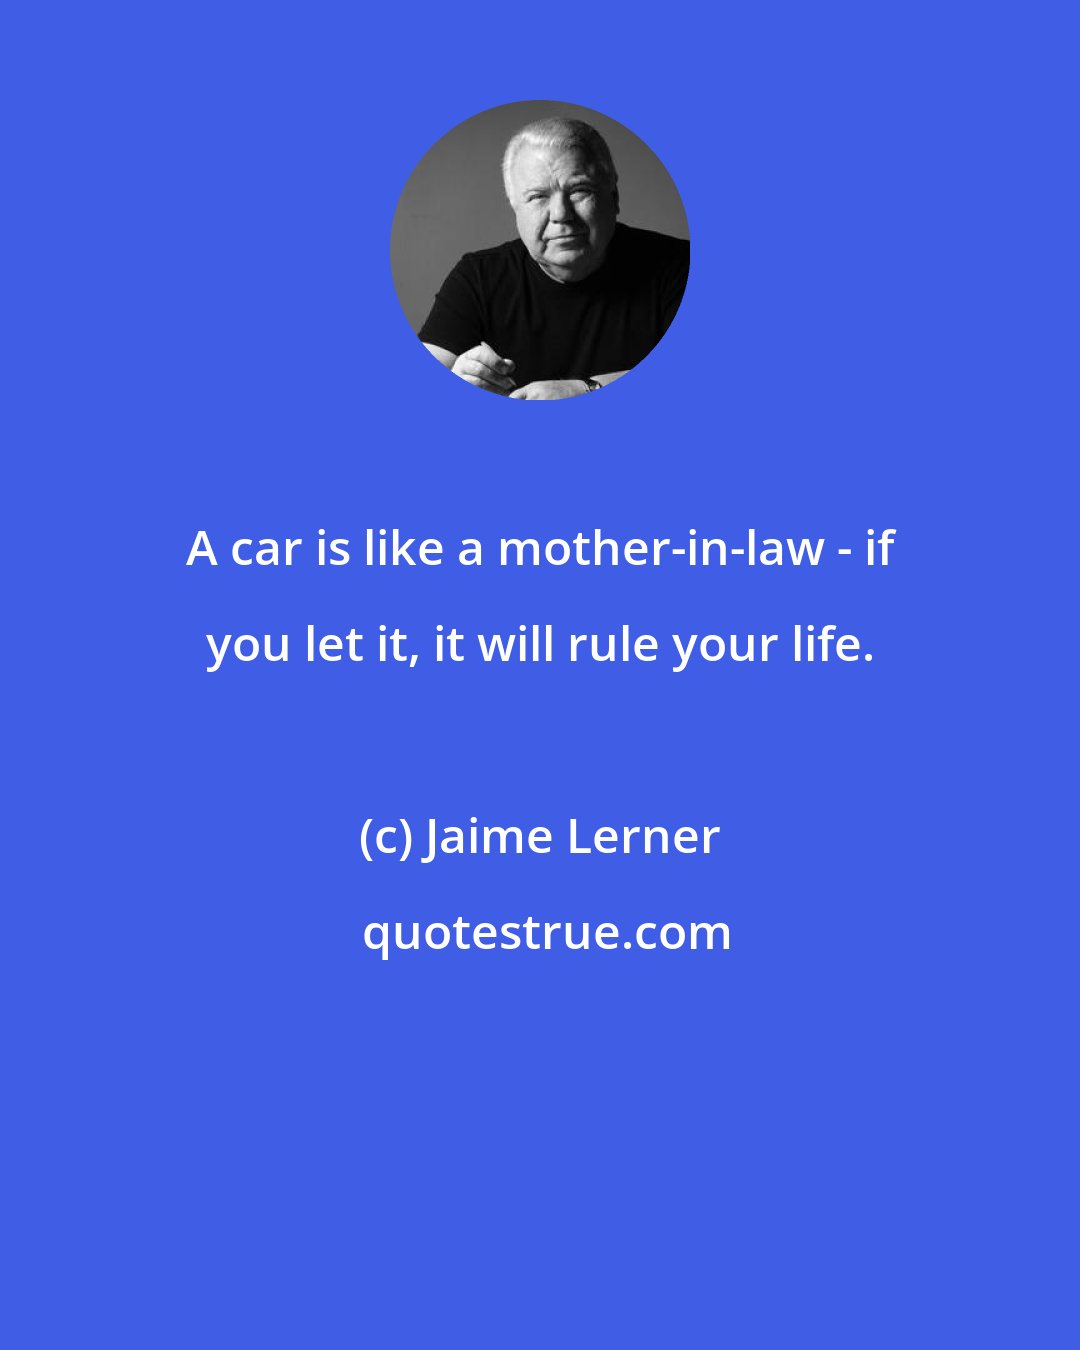 Jaime Lerner: A car is like a mother-in-law - if you let it, it will rule your life.